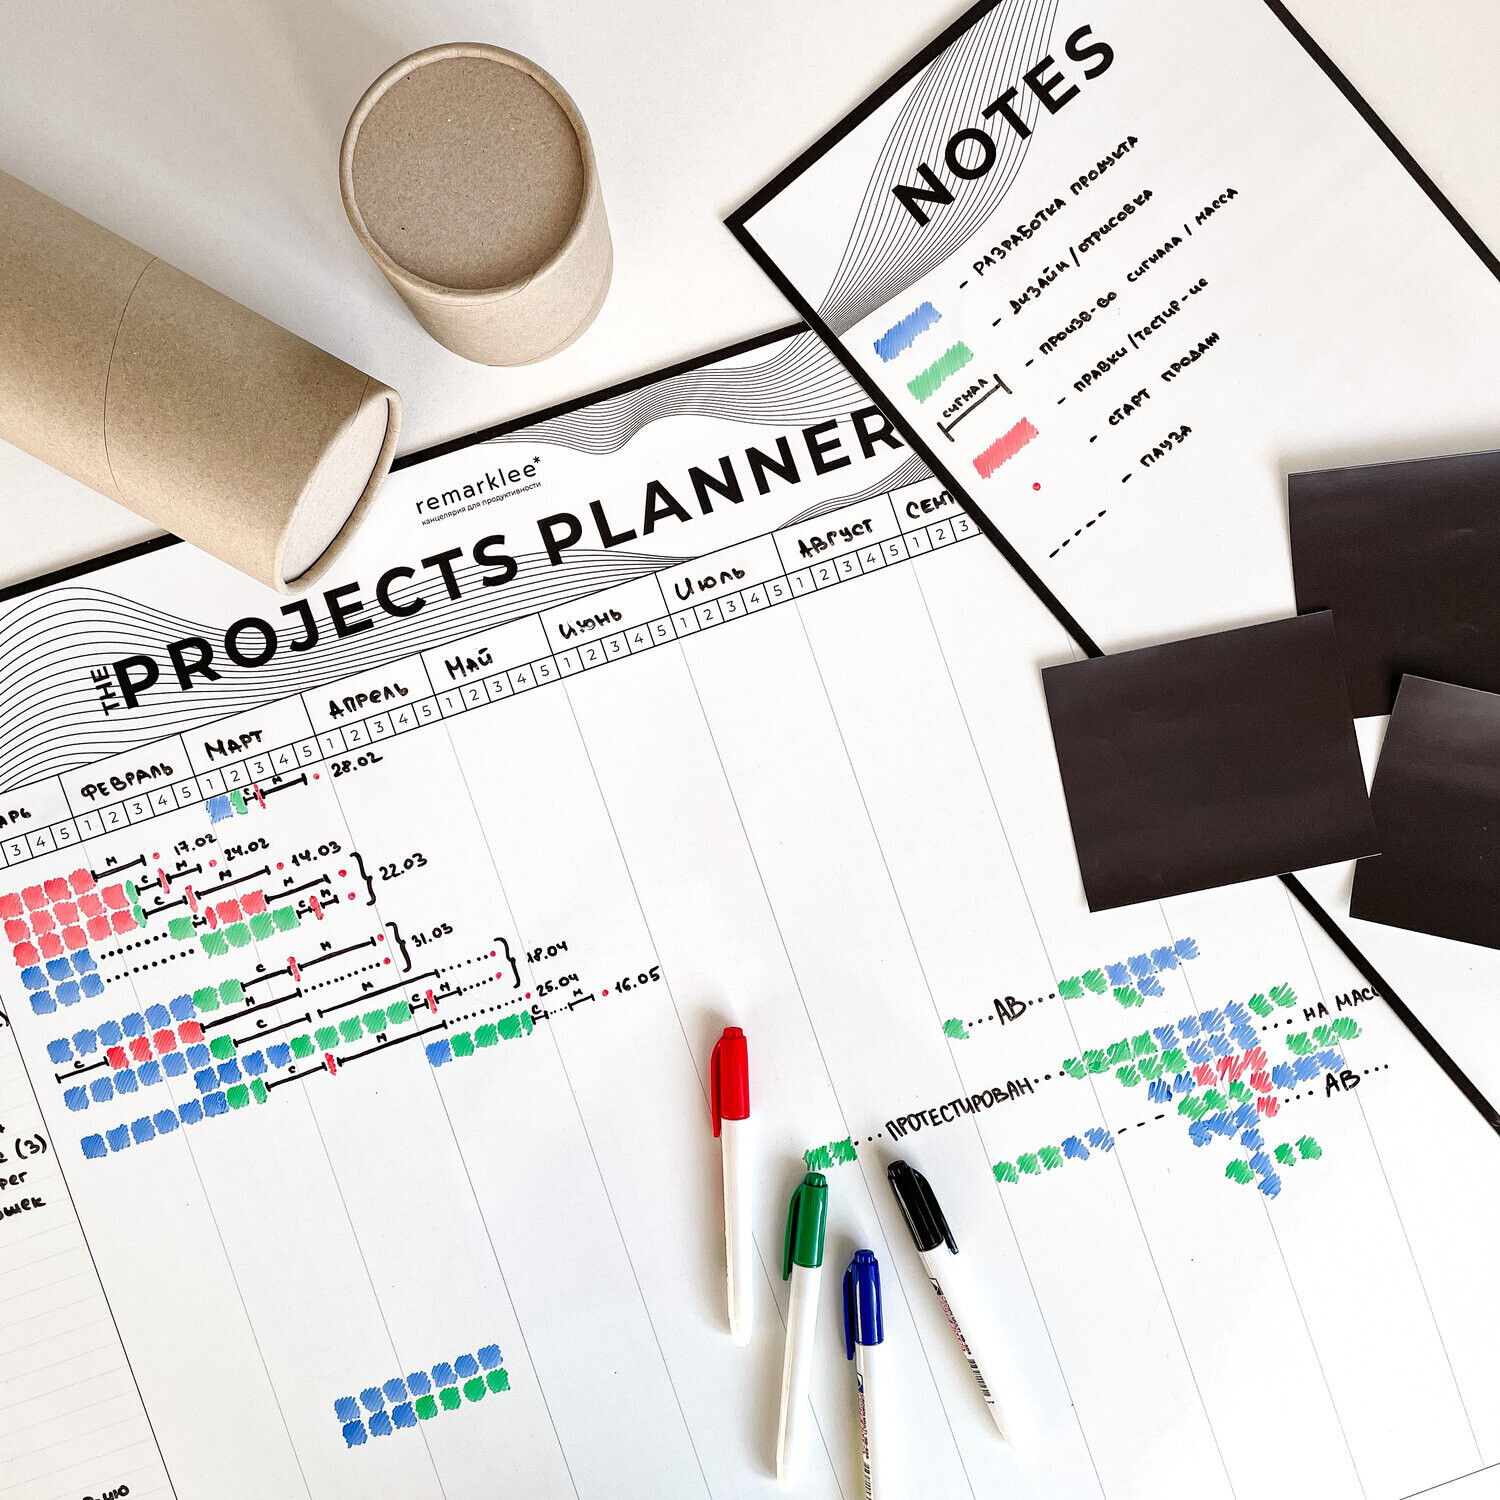 The Projects planner